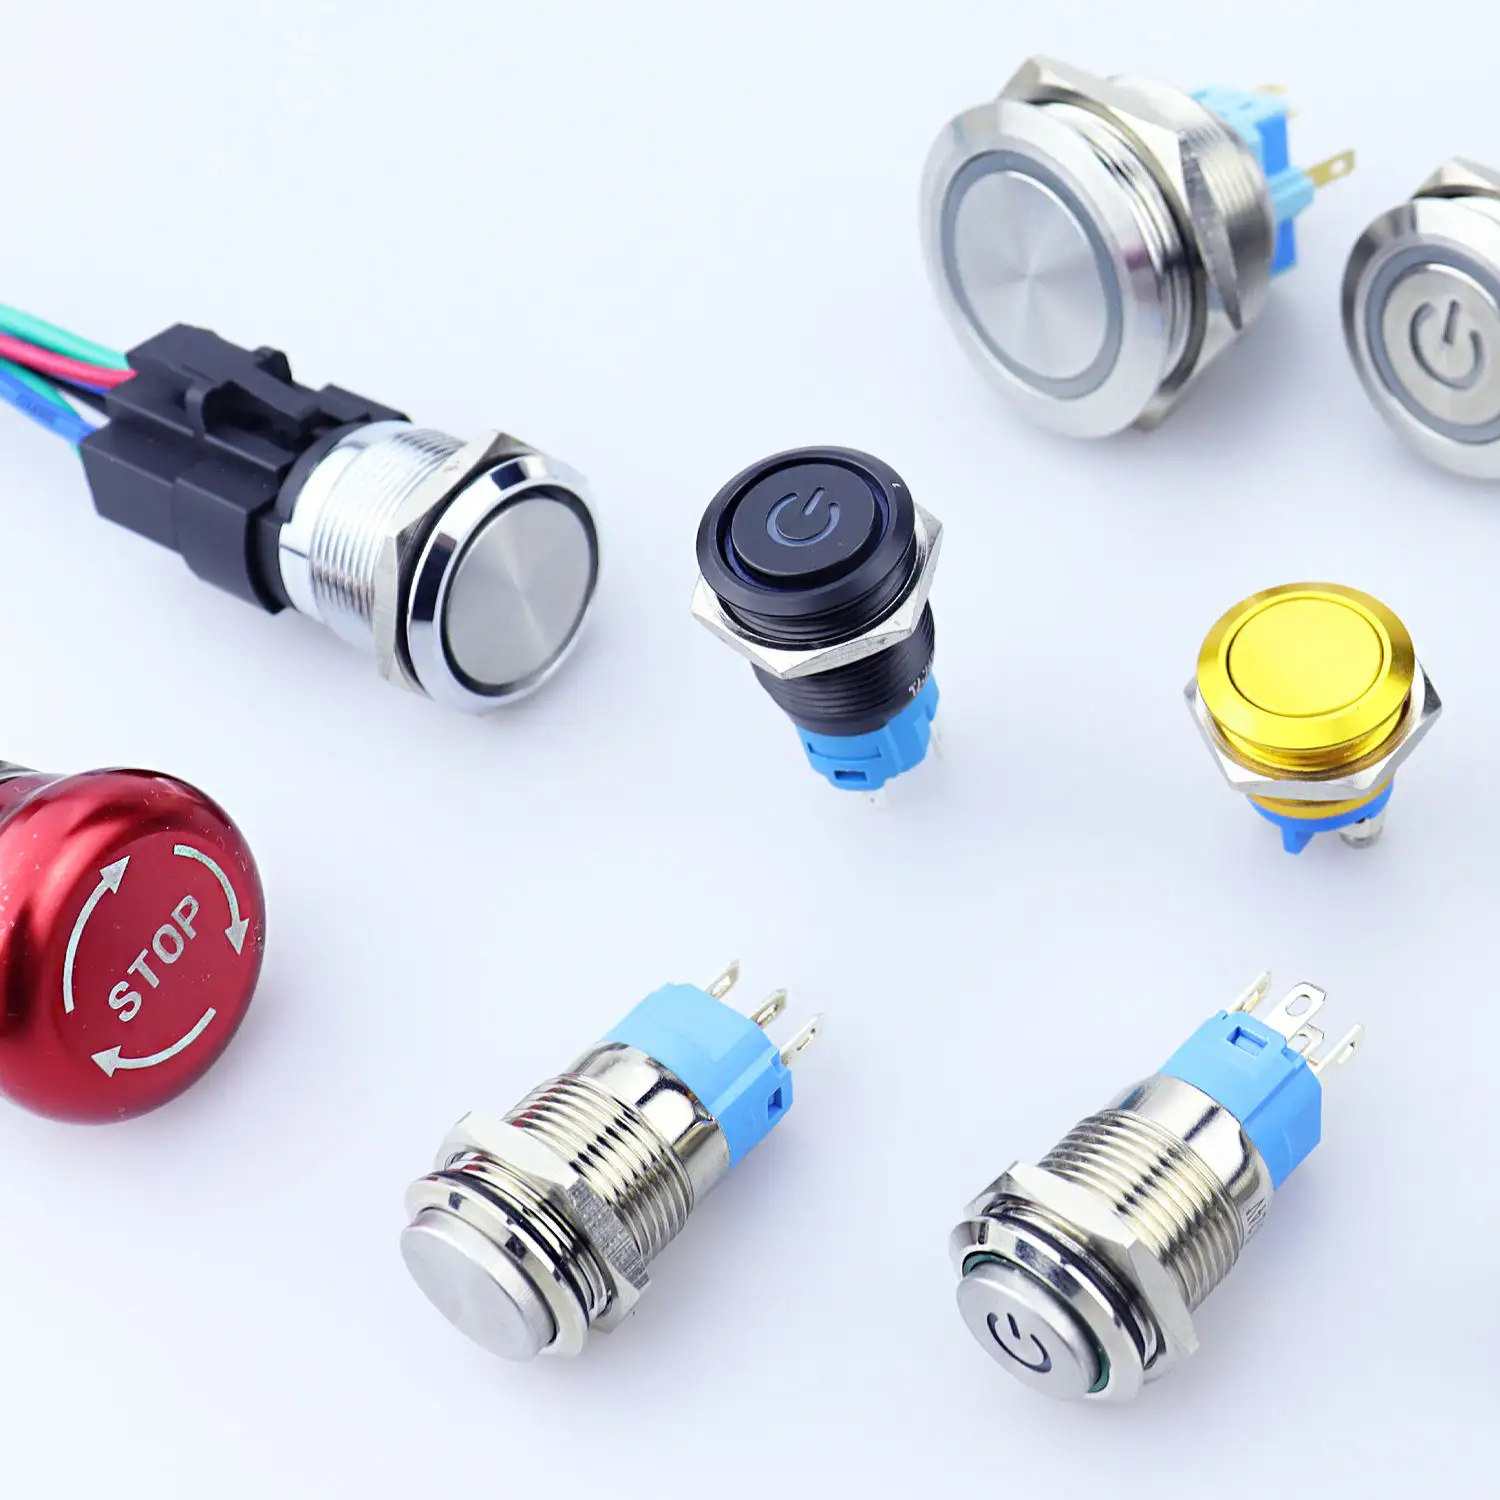 16mm 12V illuminate anti-vandal waterproof stainless steel power switches momentary led mini small metal push button switch 12mm